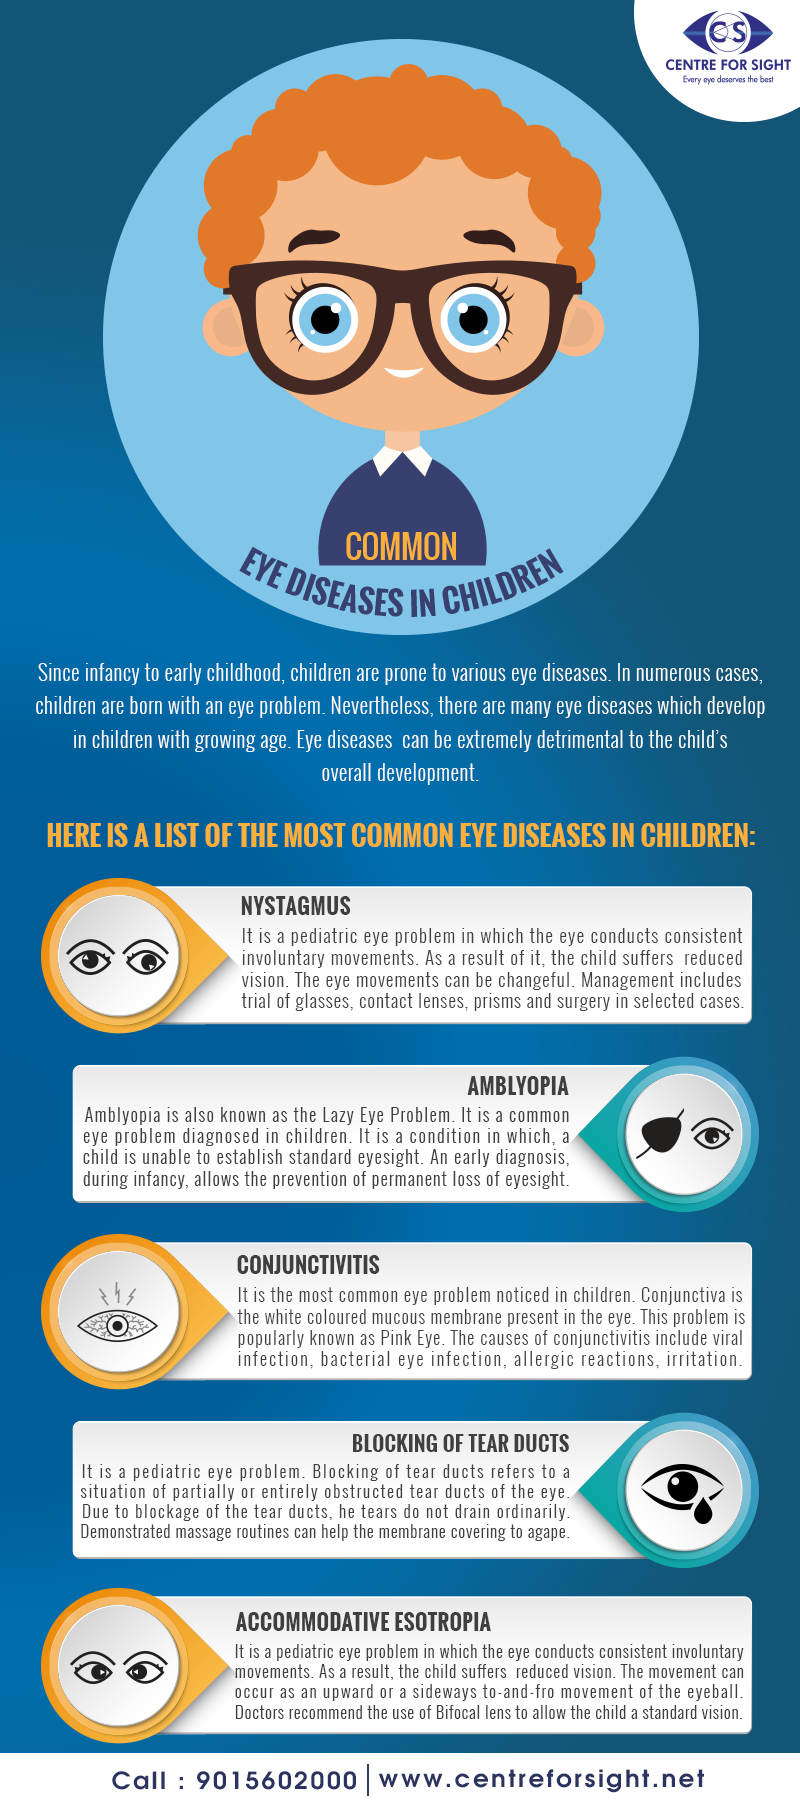 Common-eye-diseases-in-children.png  by centreforsight